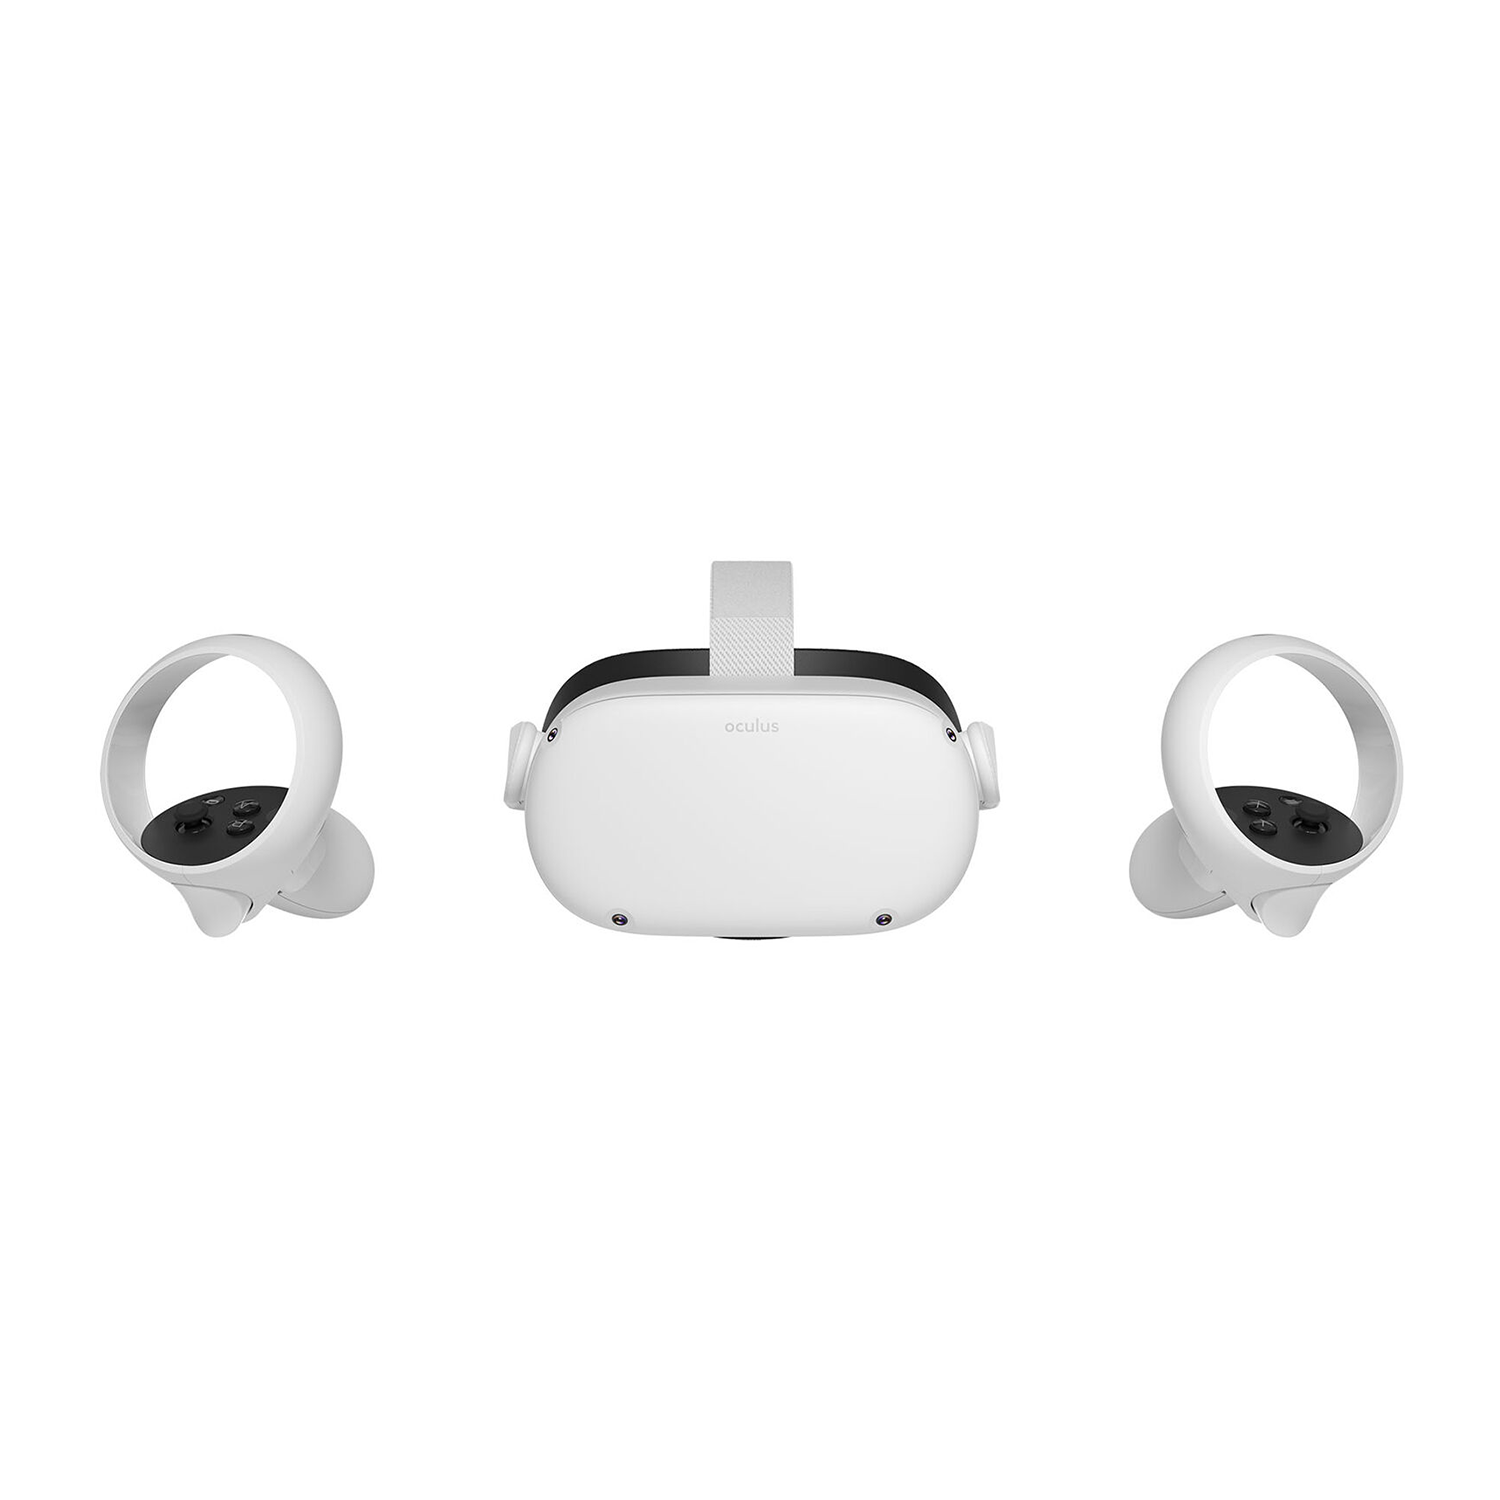 Meta Quest 2 — Advanced All-In-One Virtual Reality Headset (128 GB